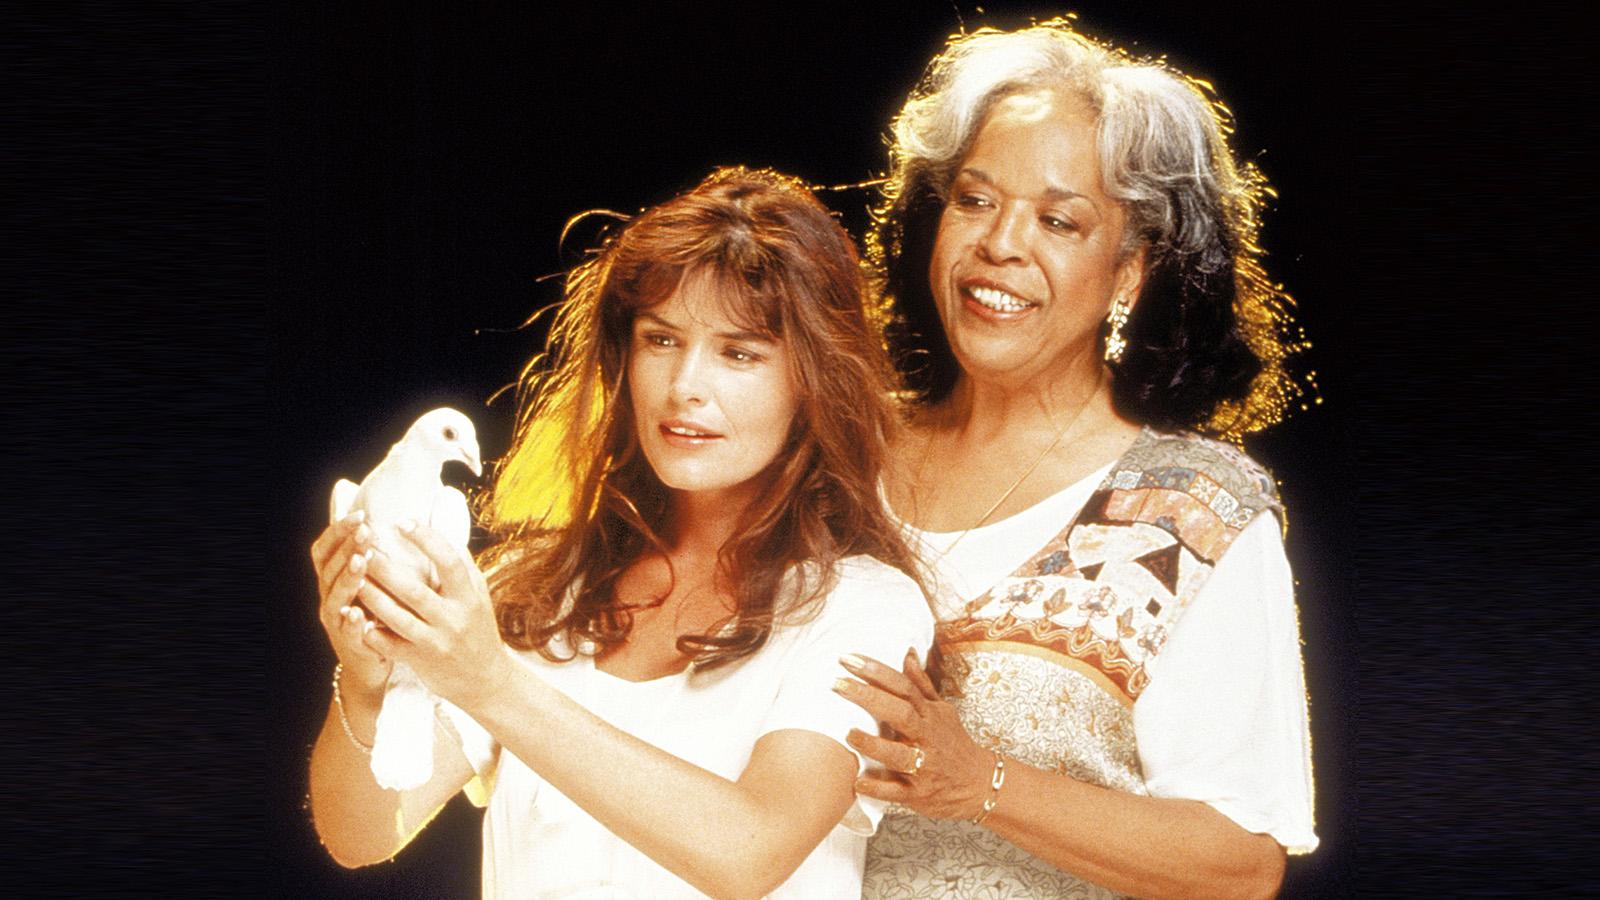 Roma Downey och Della Reese i tv-serien ”Touched by an angel”.